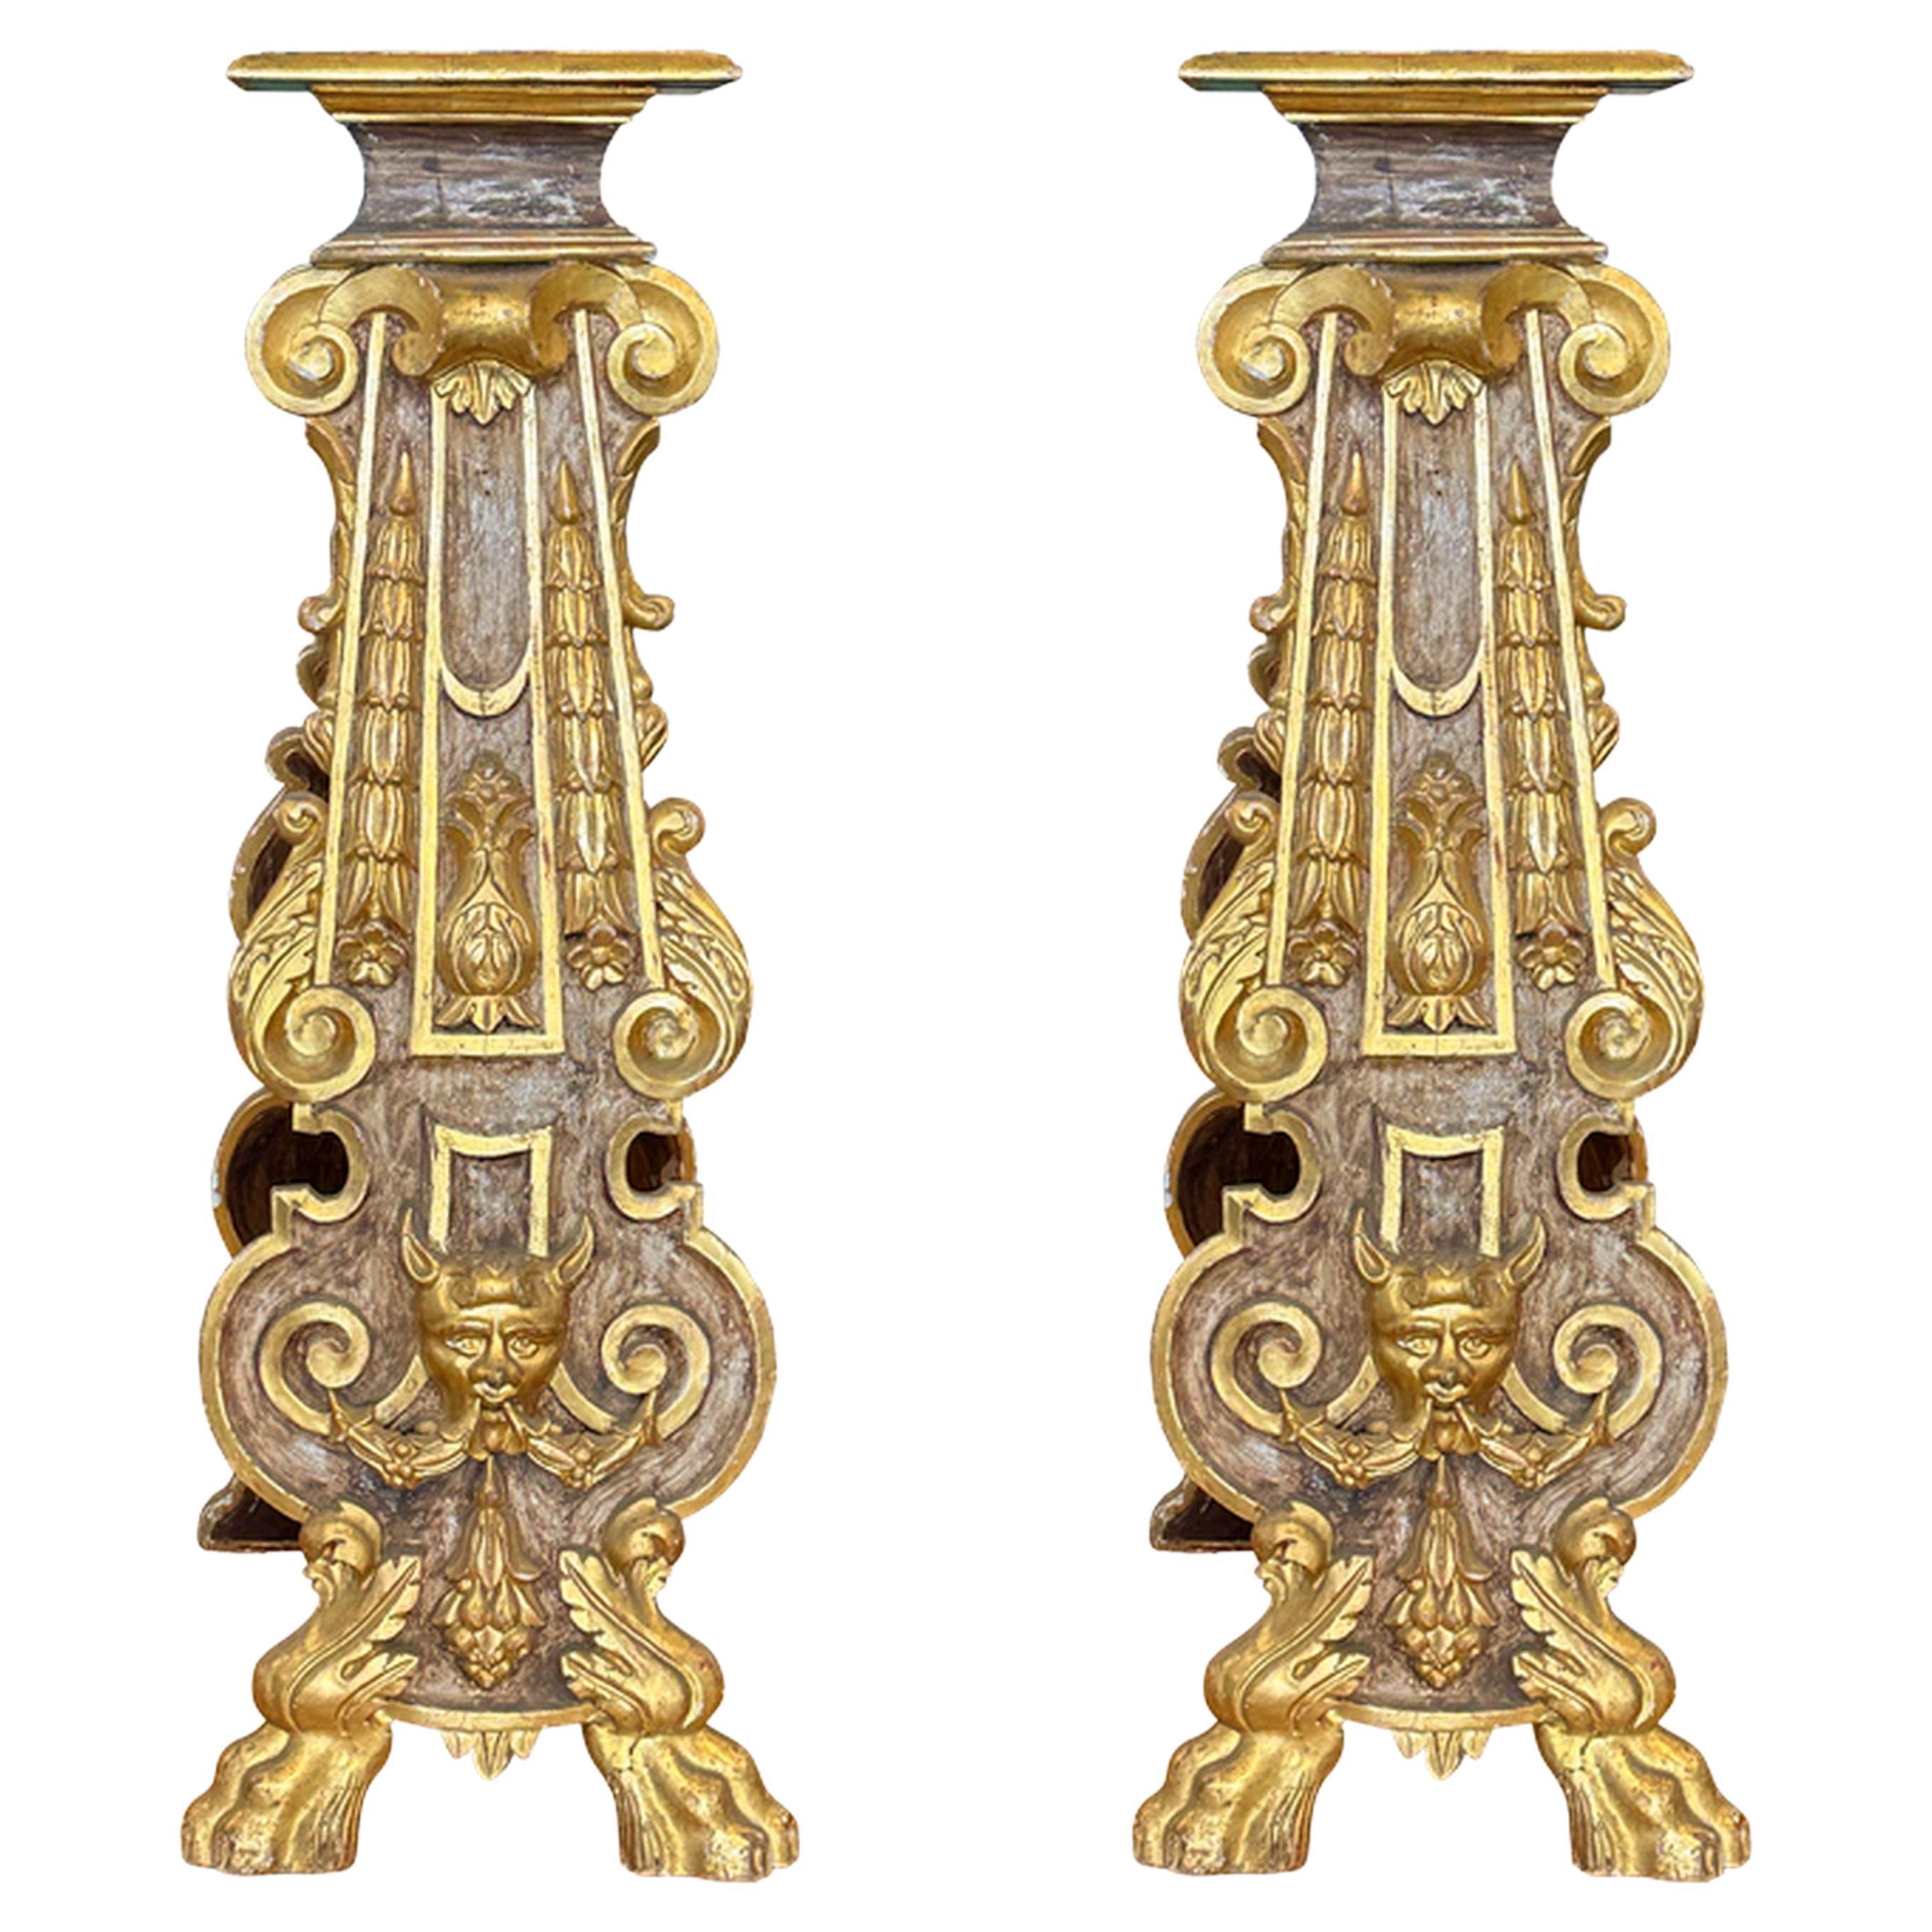 Pair of Italian Painted and Giltwood Stands, circa 1780